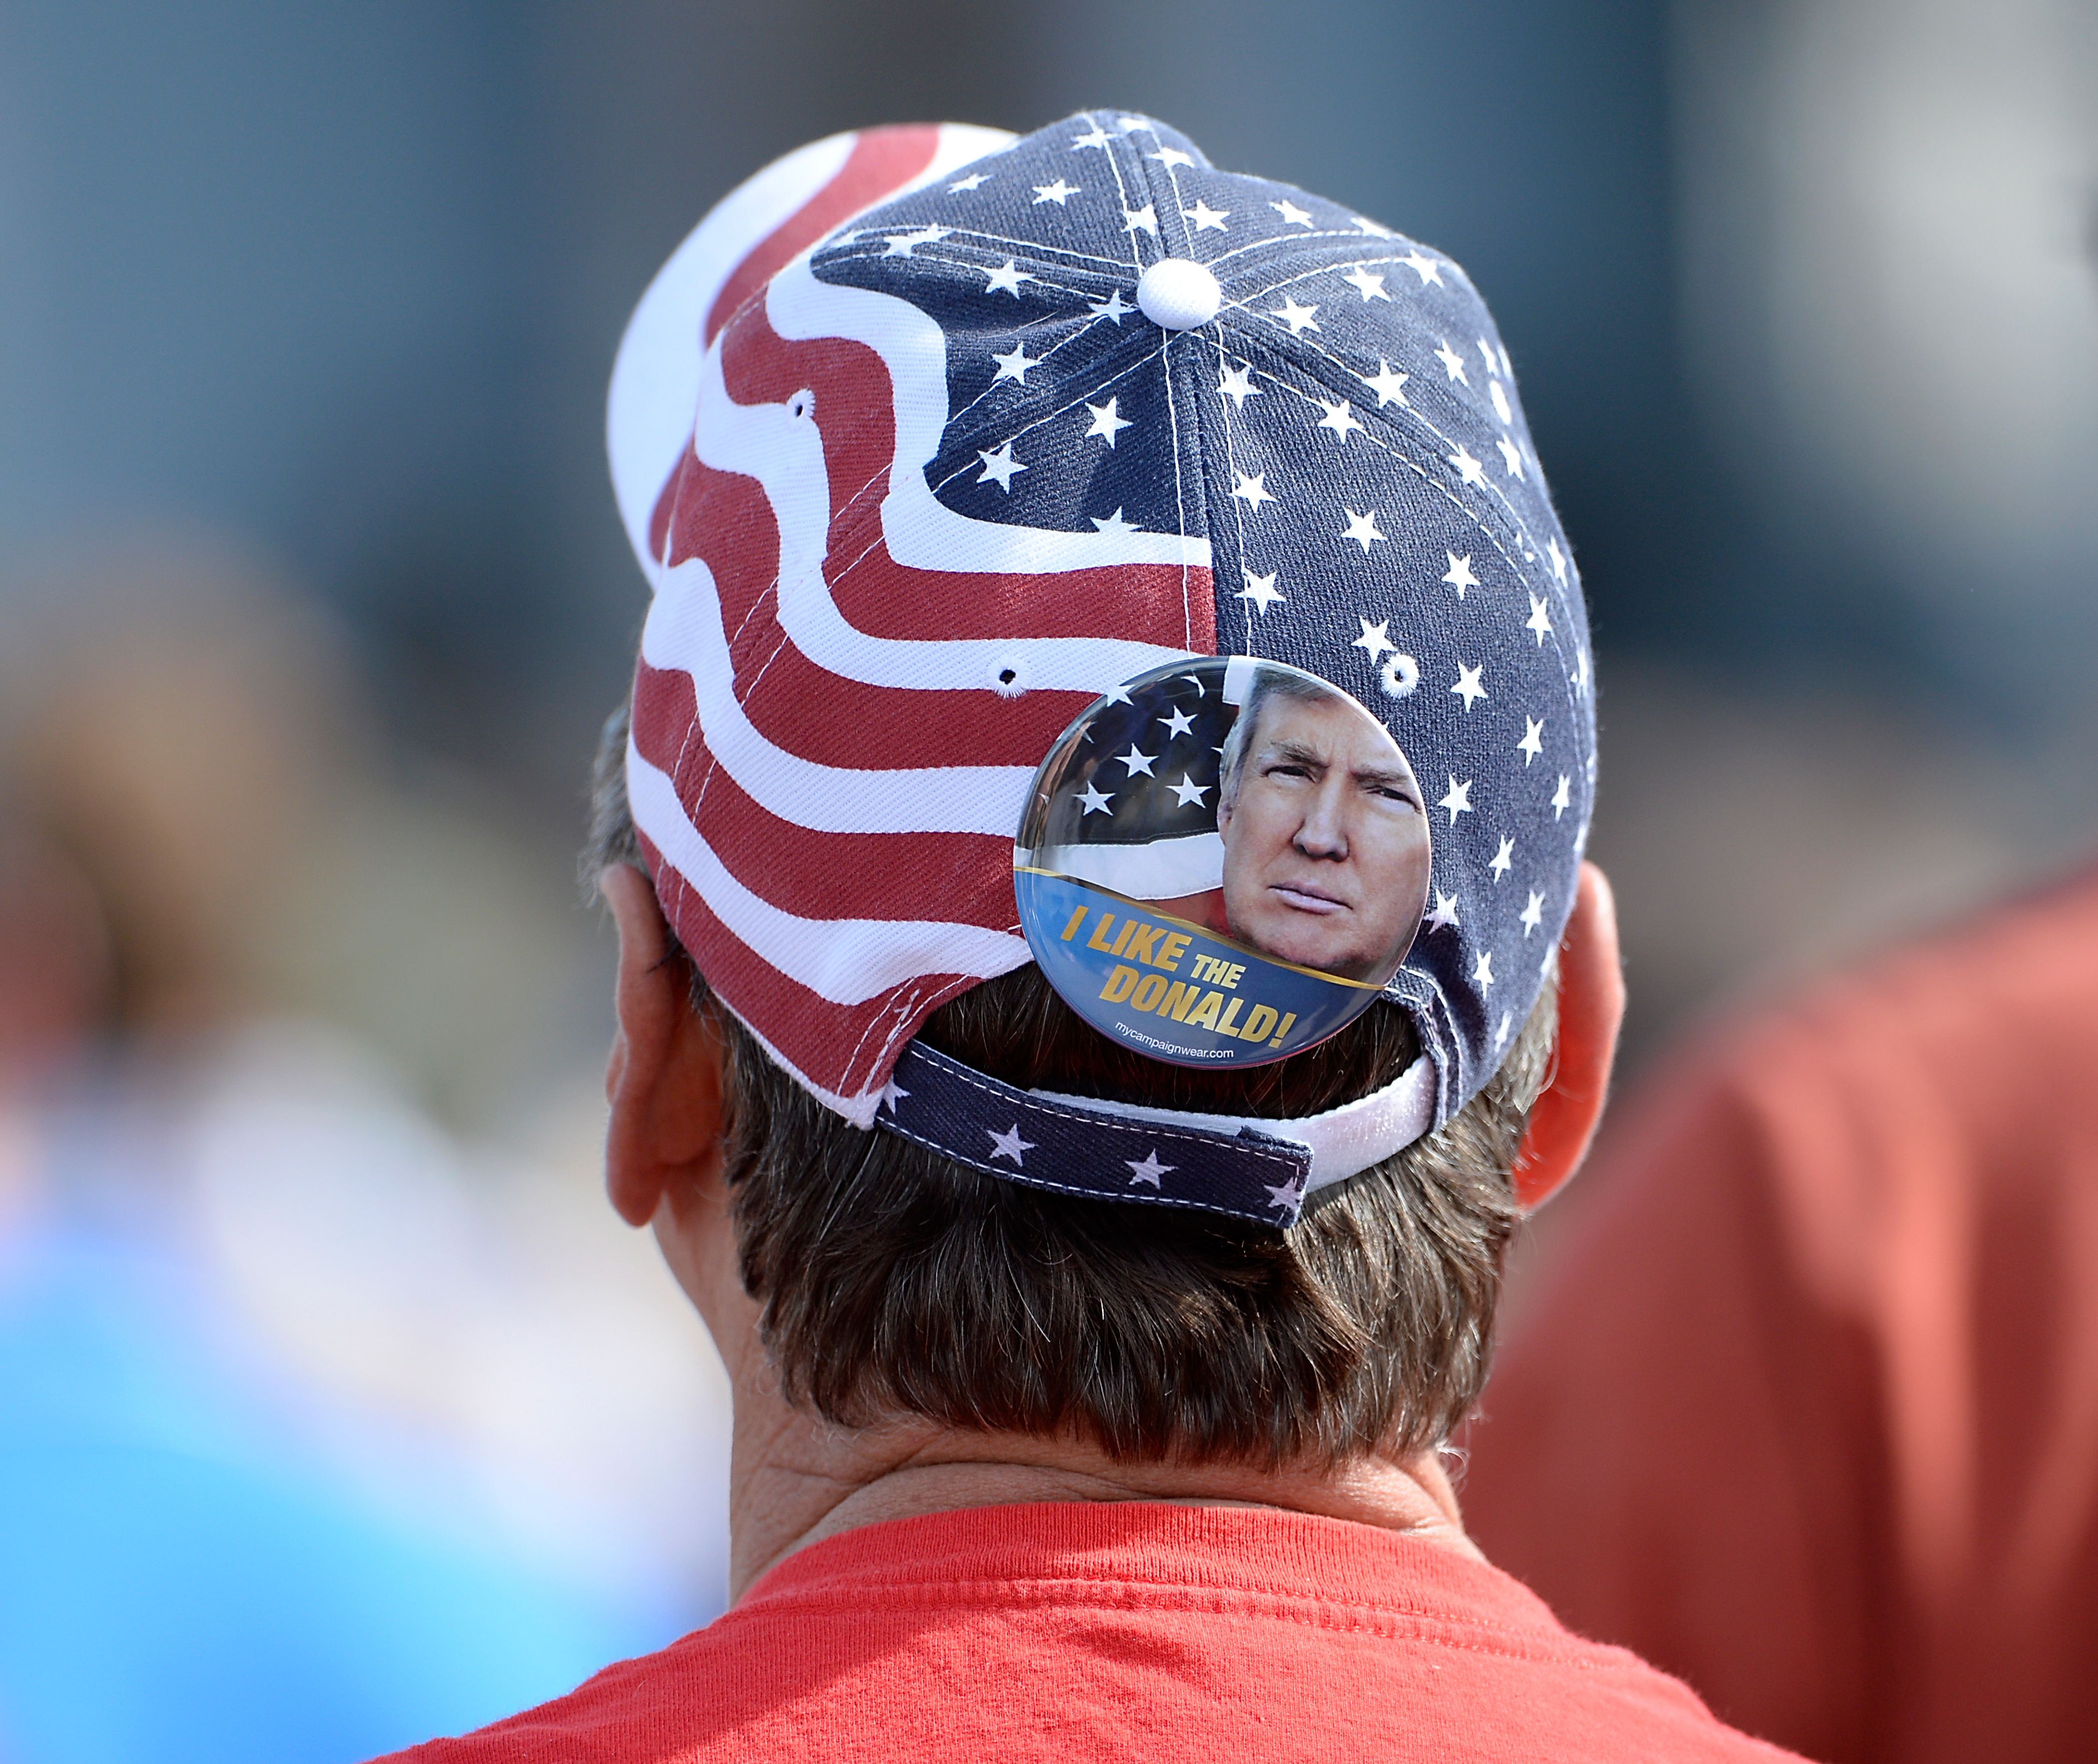 A supporter for Republican presidential candidate Donald Trump wears regalia at a rally on October 31, 2015 in Norfolk, Virginia. (Sara D. Davis &amp; Getty Images)